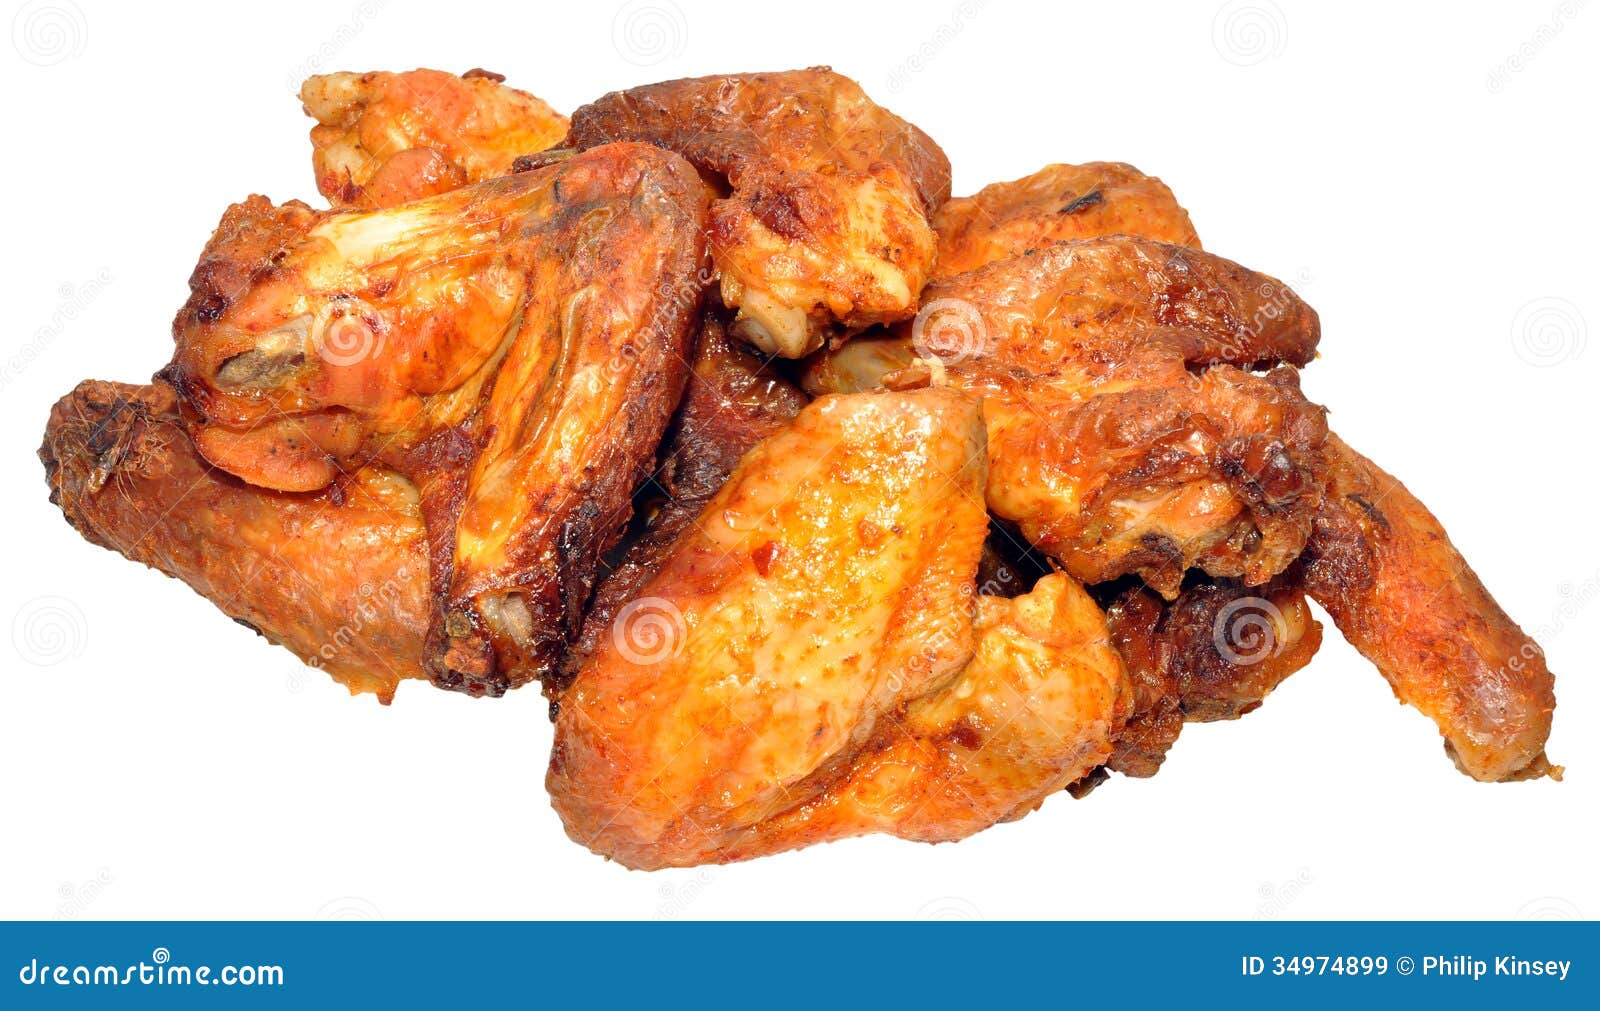 clip art for chicken wings - photo #40